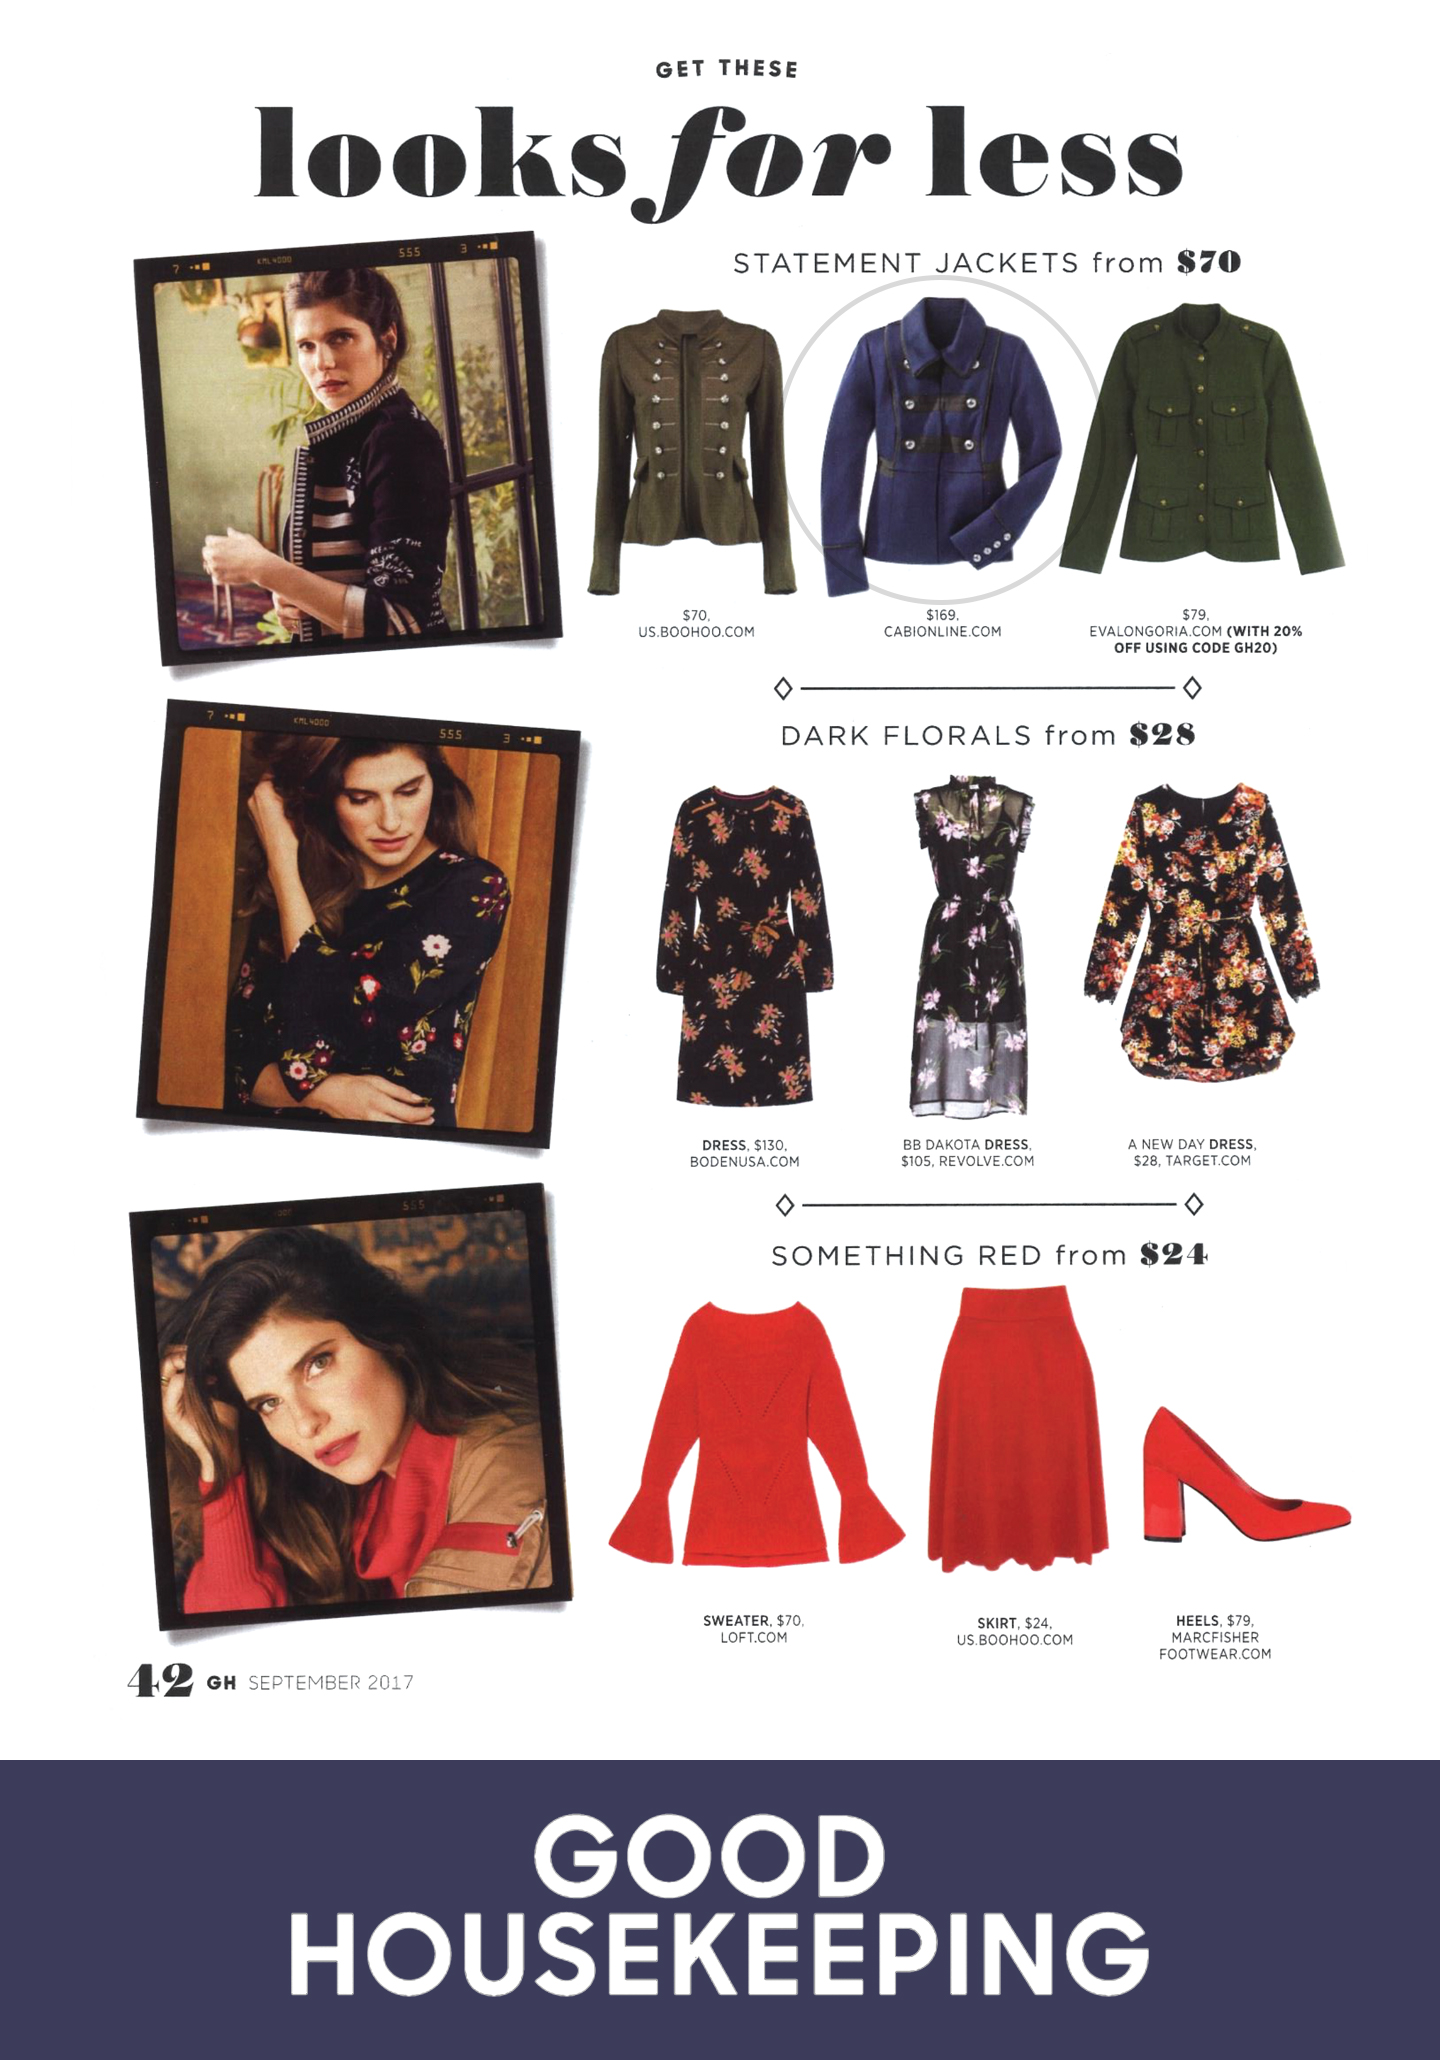 Spotted in Good Housekeeping: cabi’s Fall 2017 In the Band Jacket